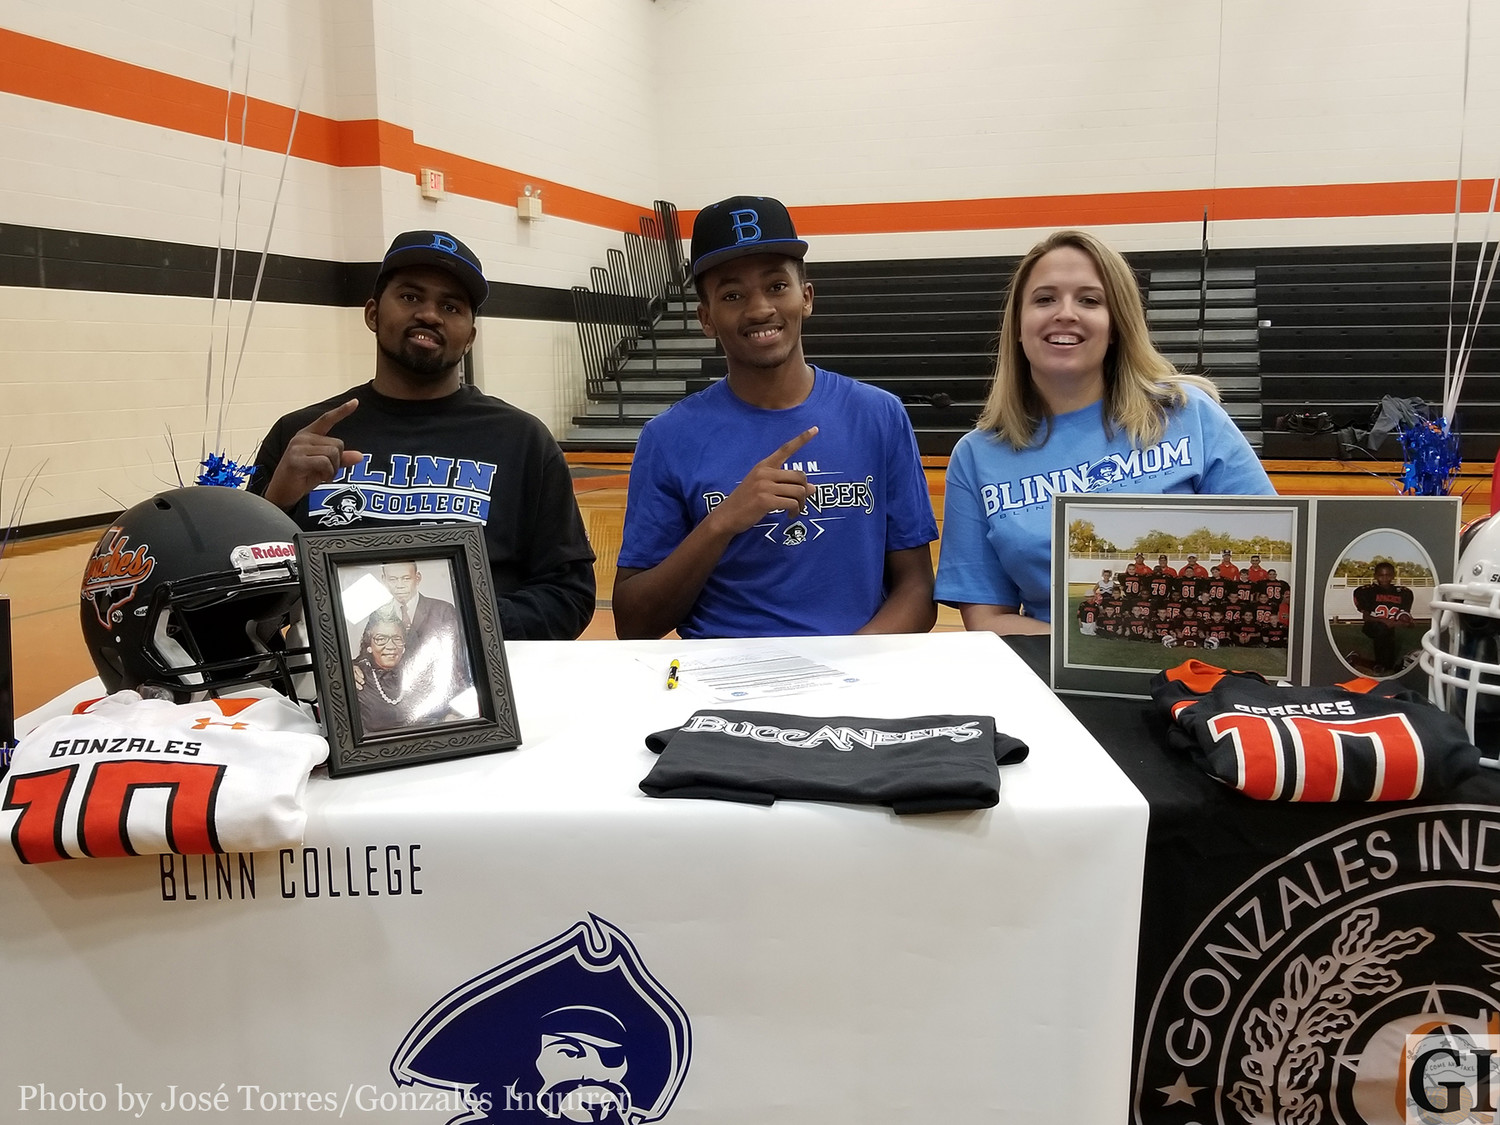 The multi-sport athlete Trevion McNeil officially signed on to attend Blinn College and play football for the Buccaneers.